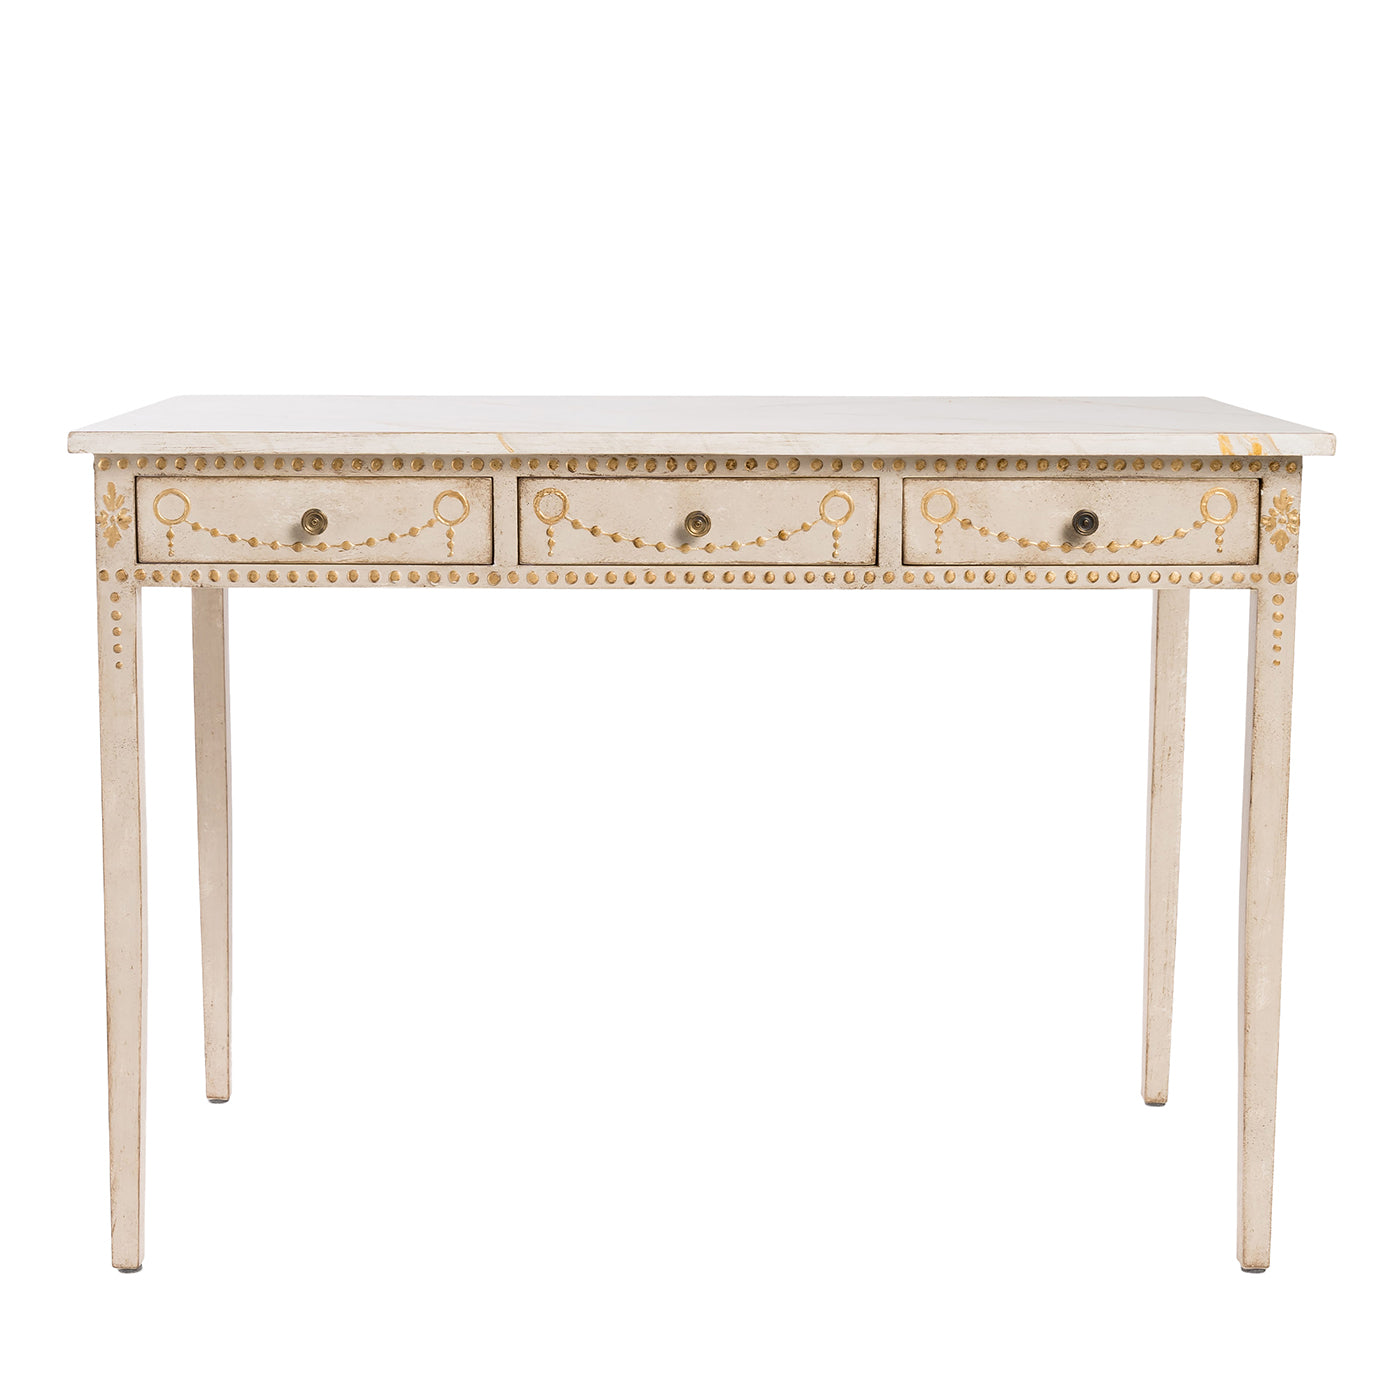 Provenza Light Taupe Console - Main view